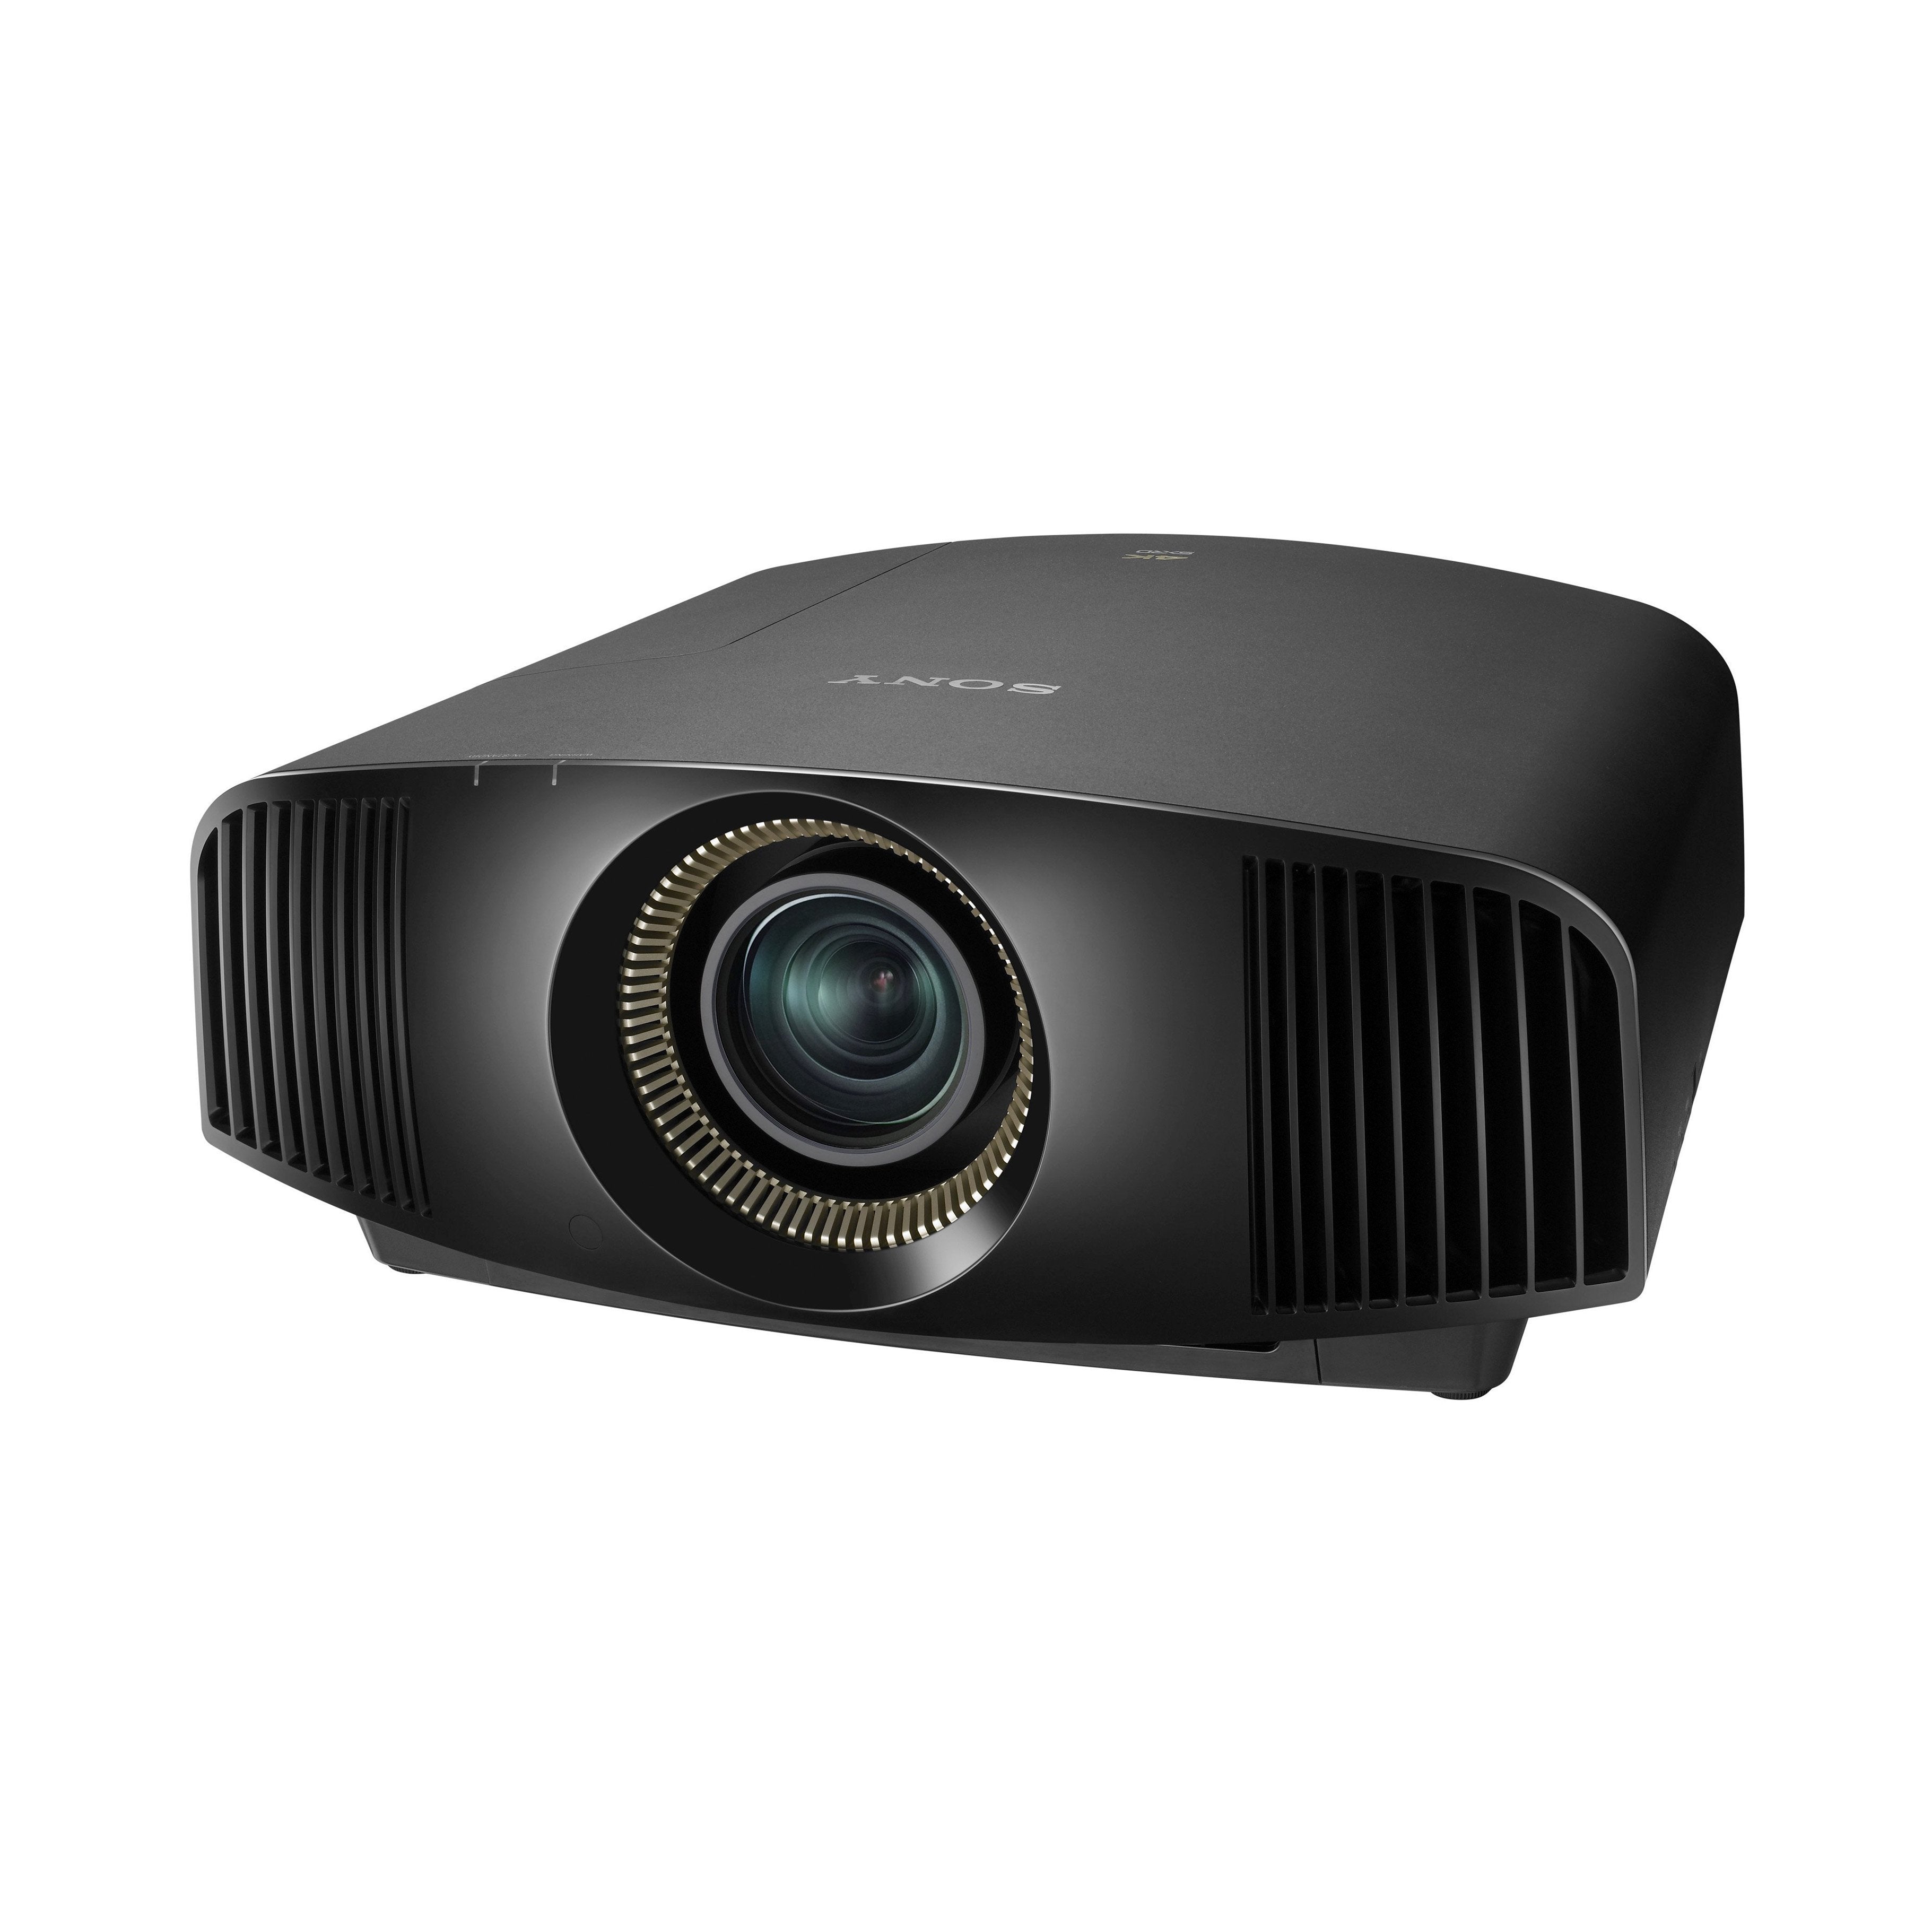 Sony VPL-VW695ES 4K HDR Home Theater Projector